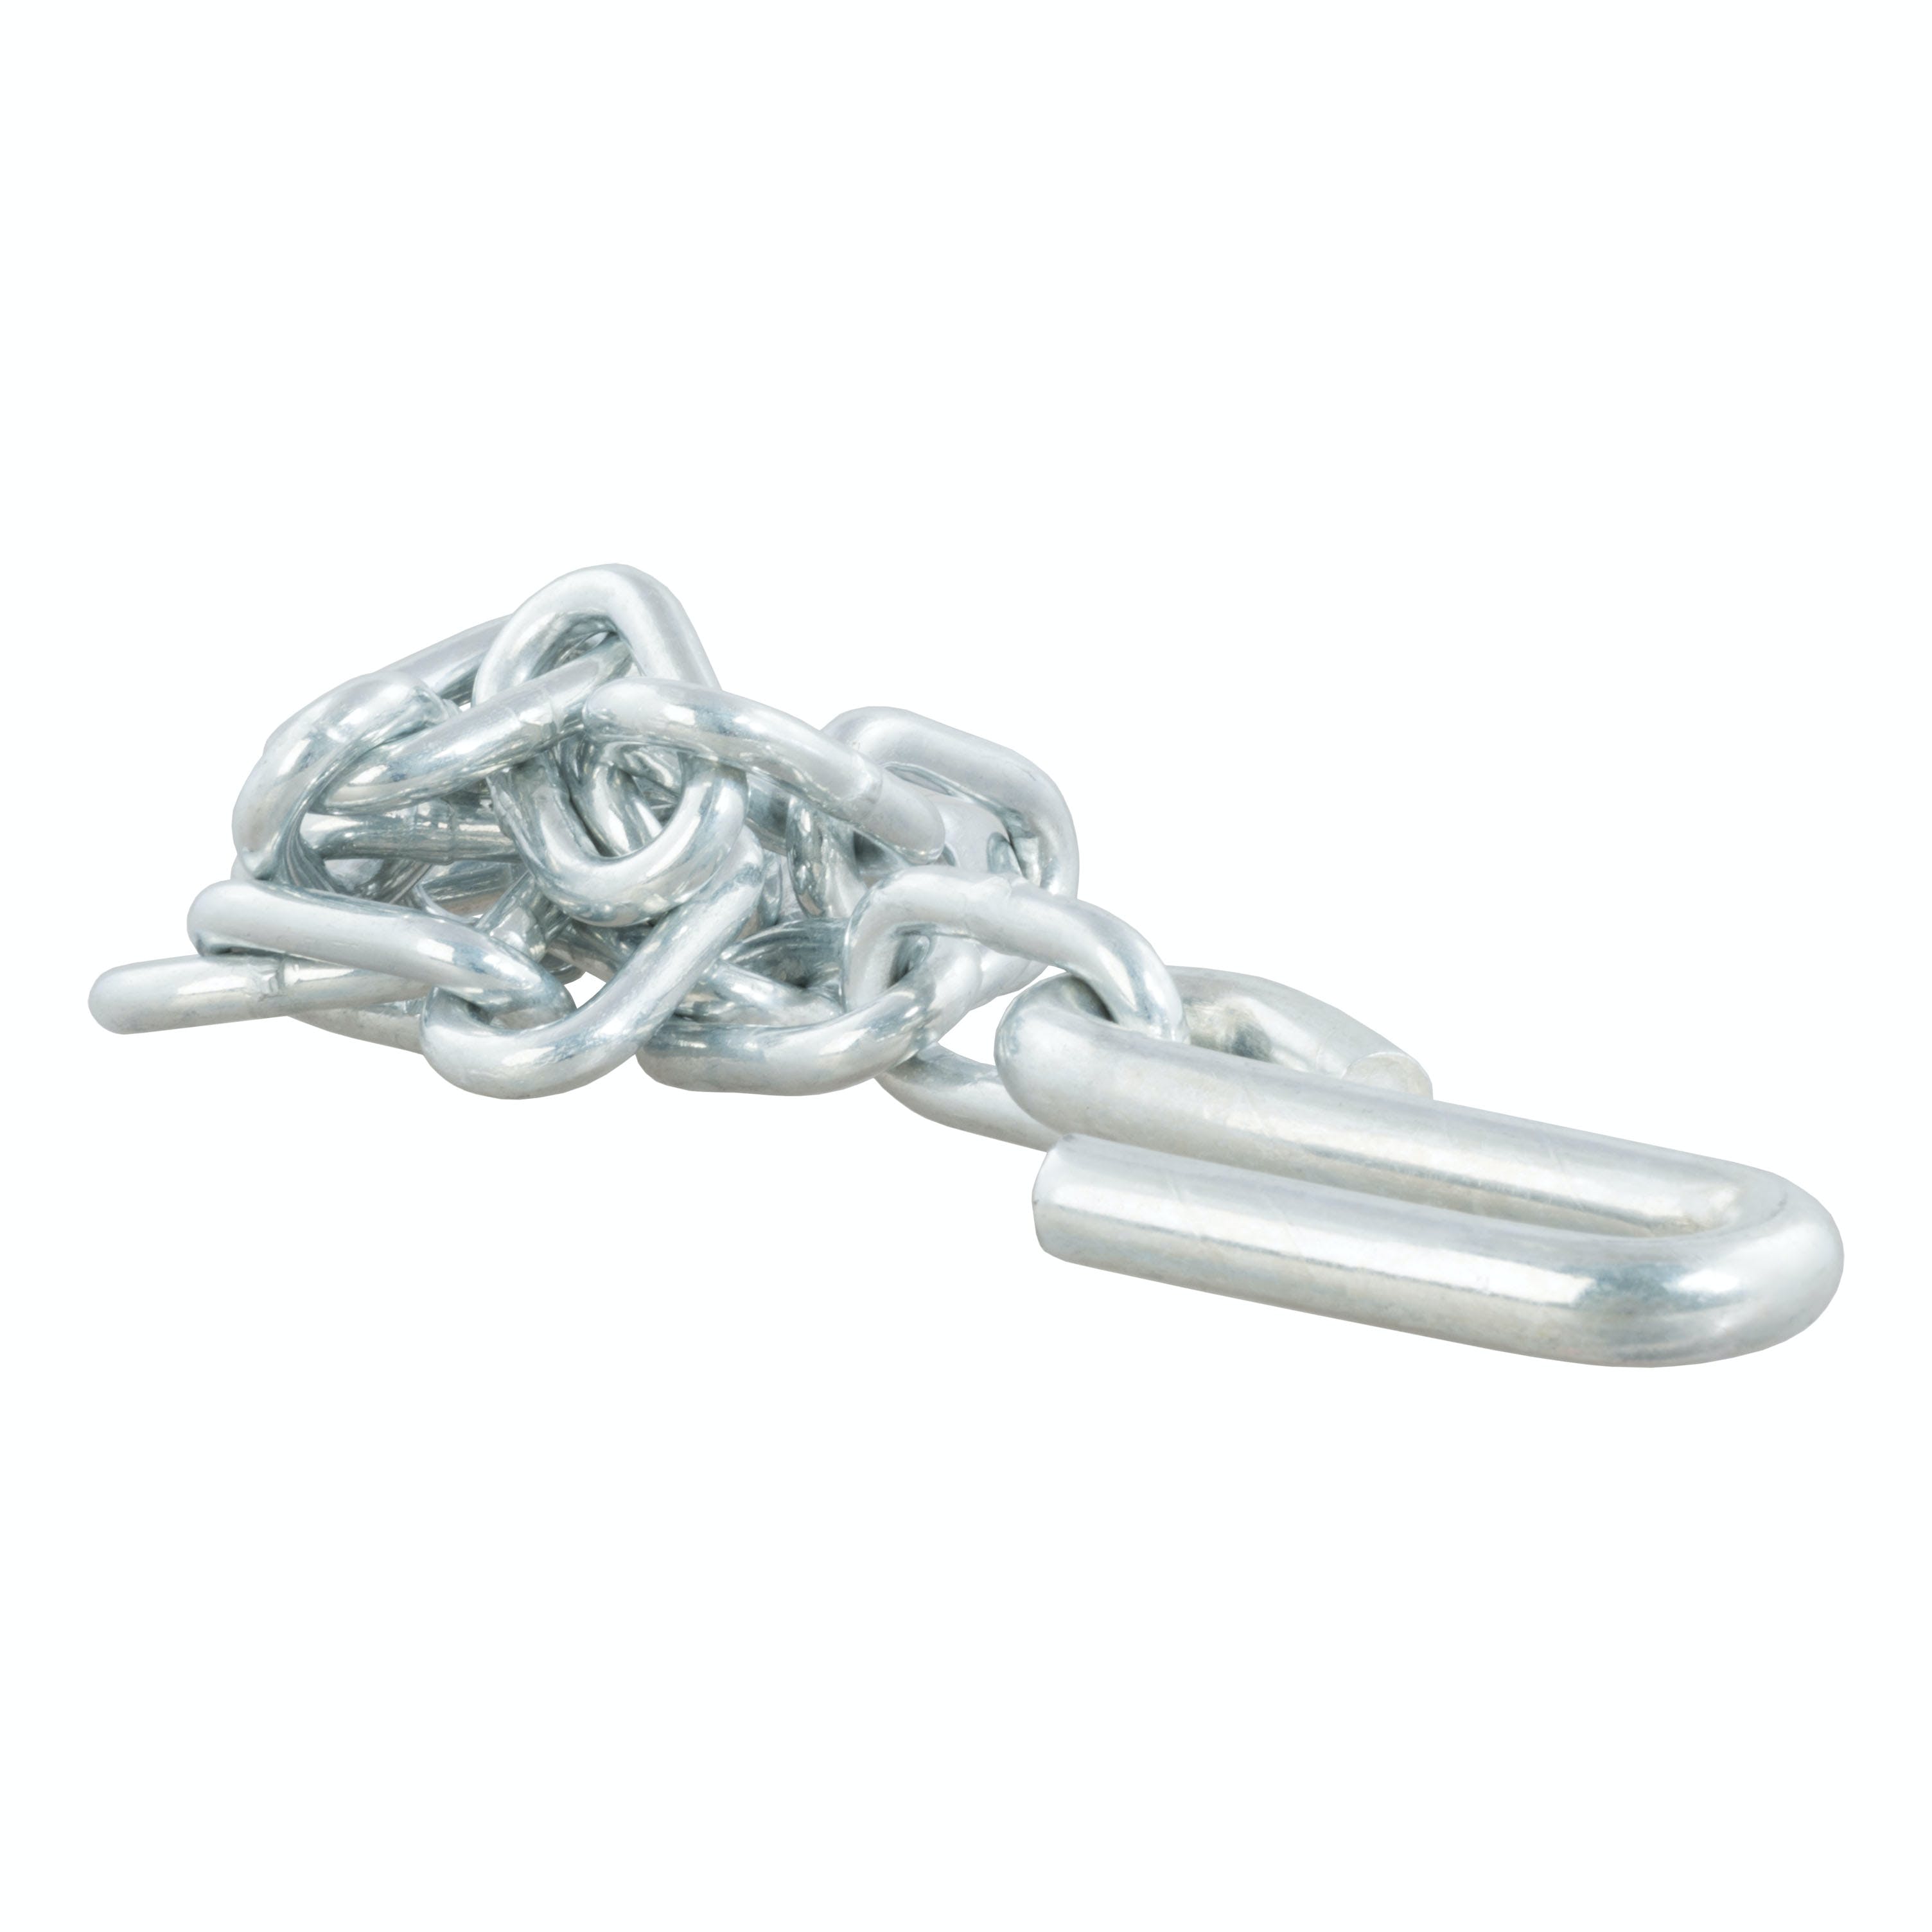 CURT 80040 27 Safety Chain with 1 S-Hook (5,000 lbs, Clear Zinc)